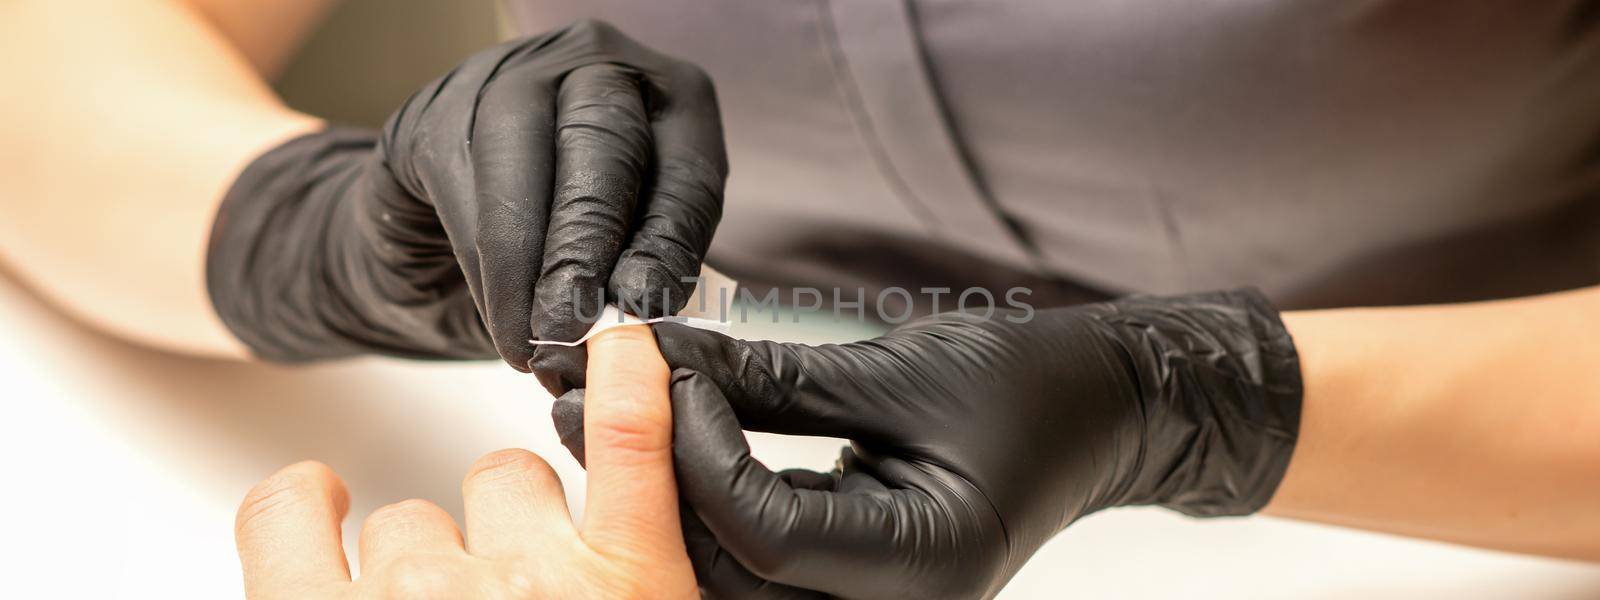 The manicurist finishes the procedure for red nail polishing and cleaning with a cotton napkin, pad, swab in a beauty salon, close up